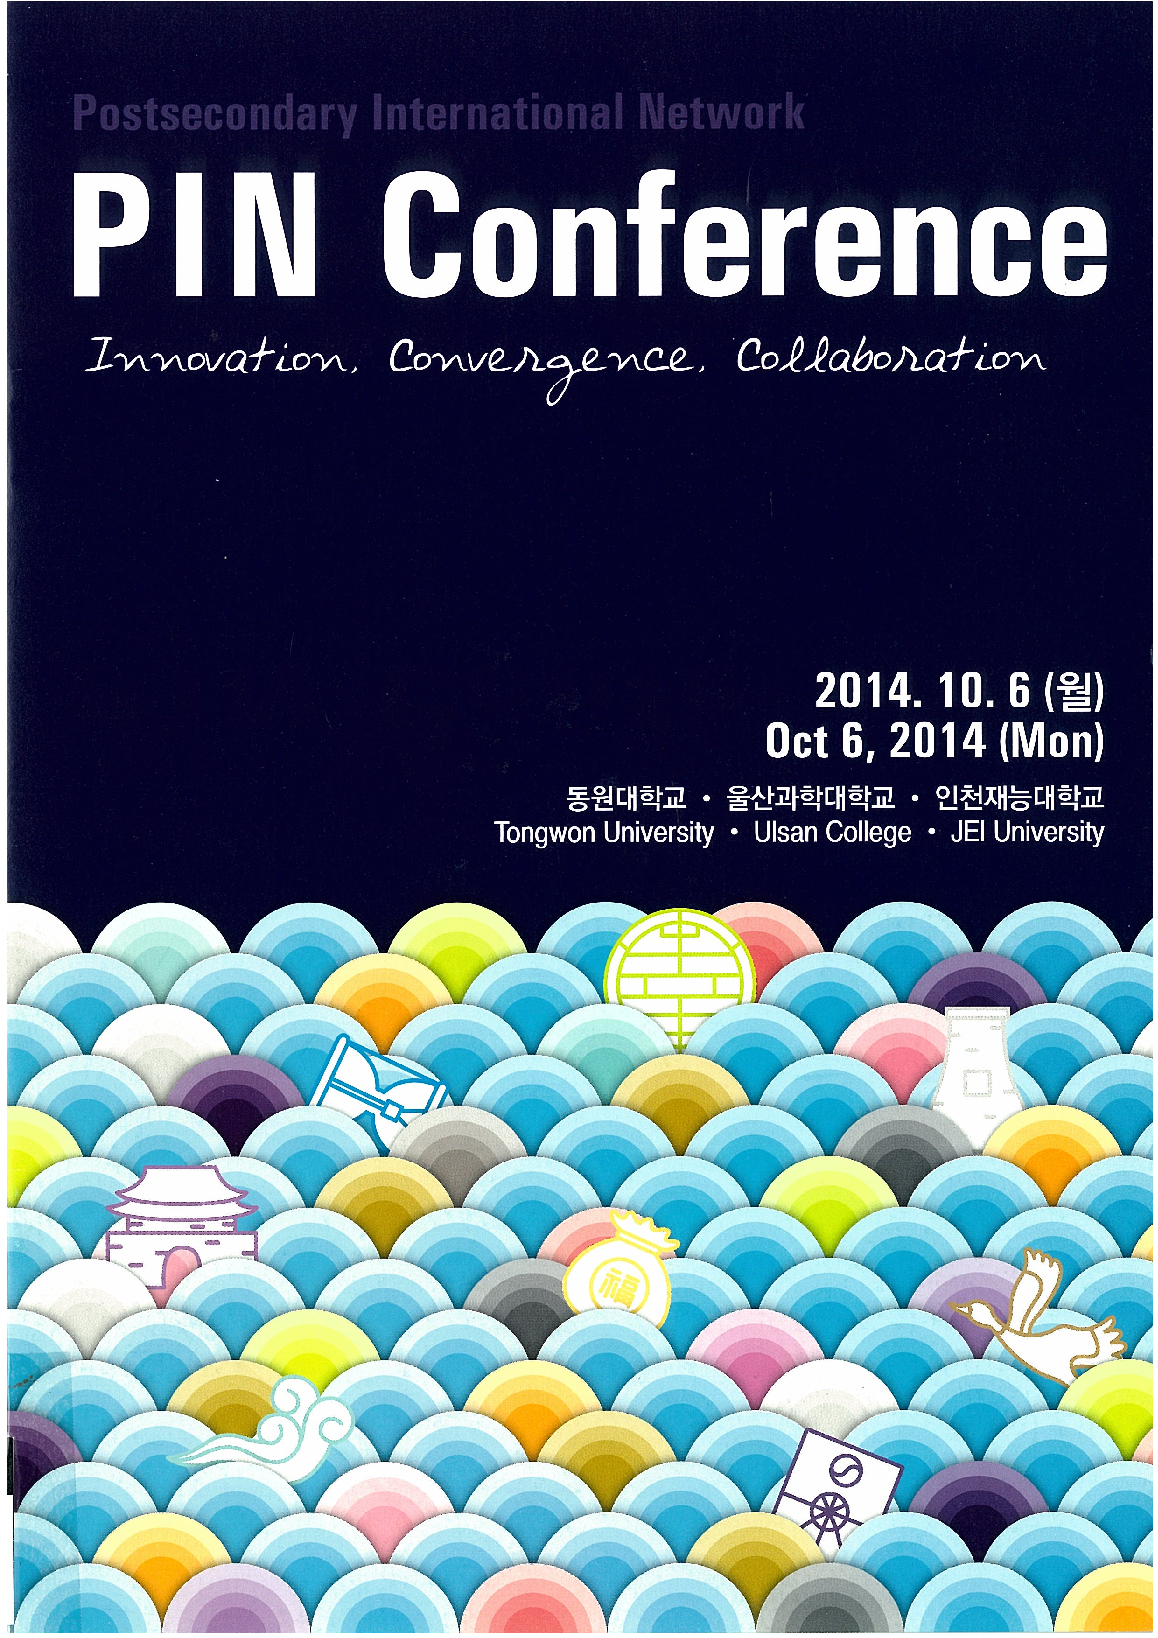 PIN Conference